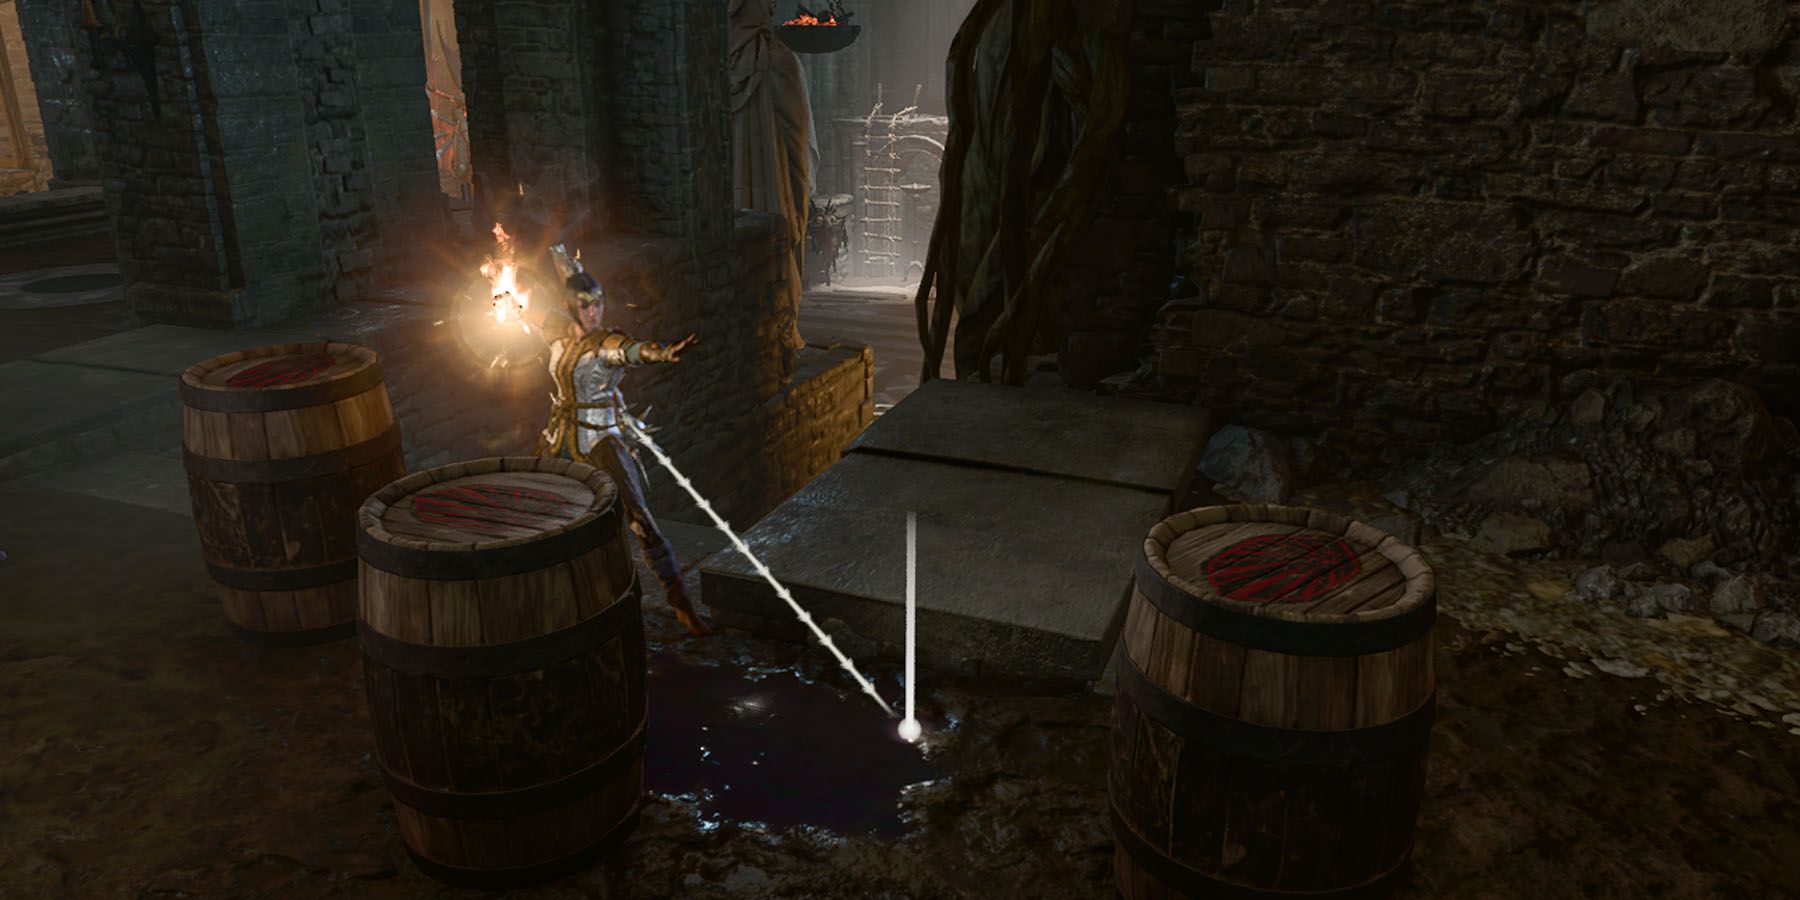 A spellcaster targeting a barrel on an oil surface